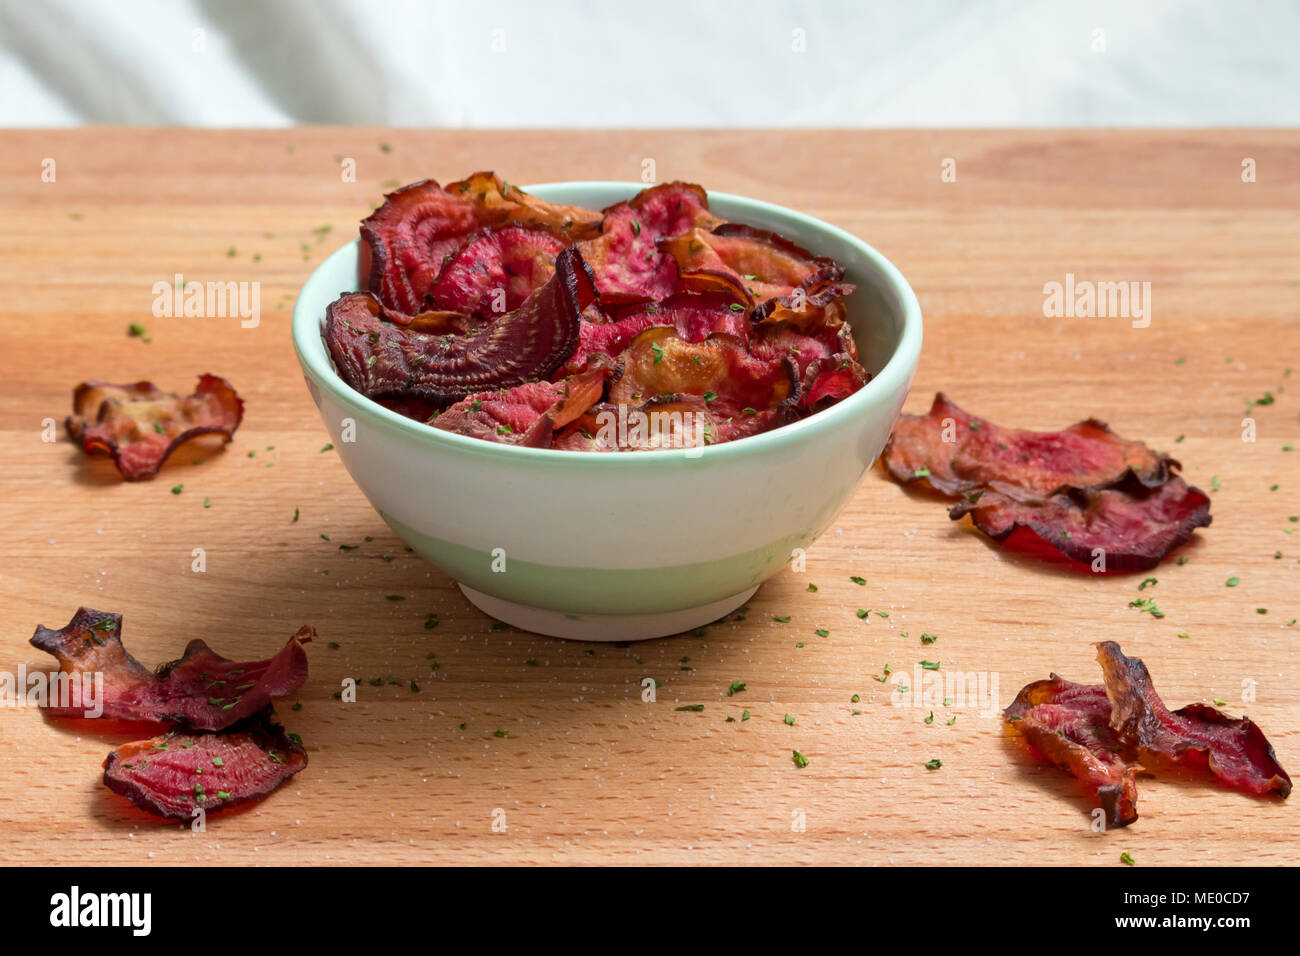 Roasted vegetable chips. These oven-baked candy beetroot crisps are a great healthy snack. Stock Photo